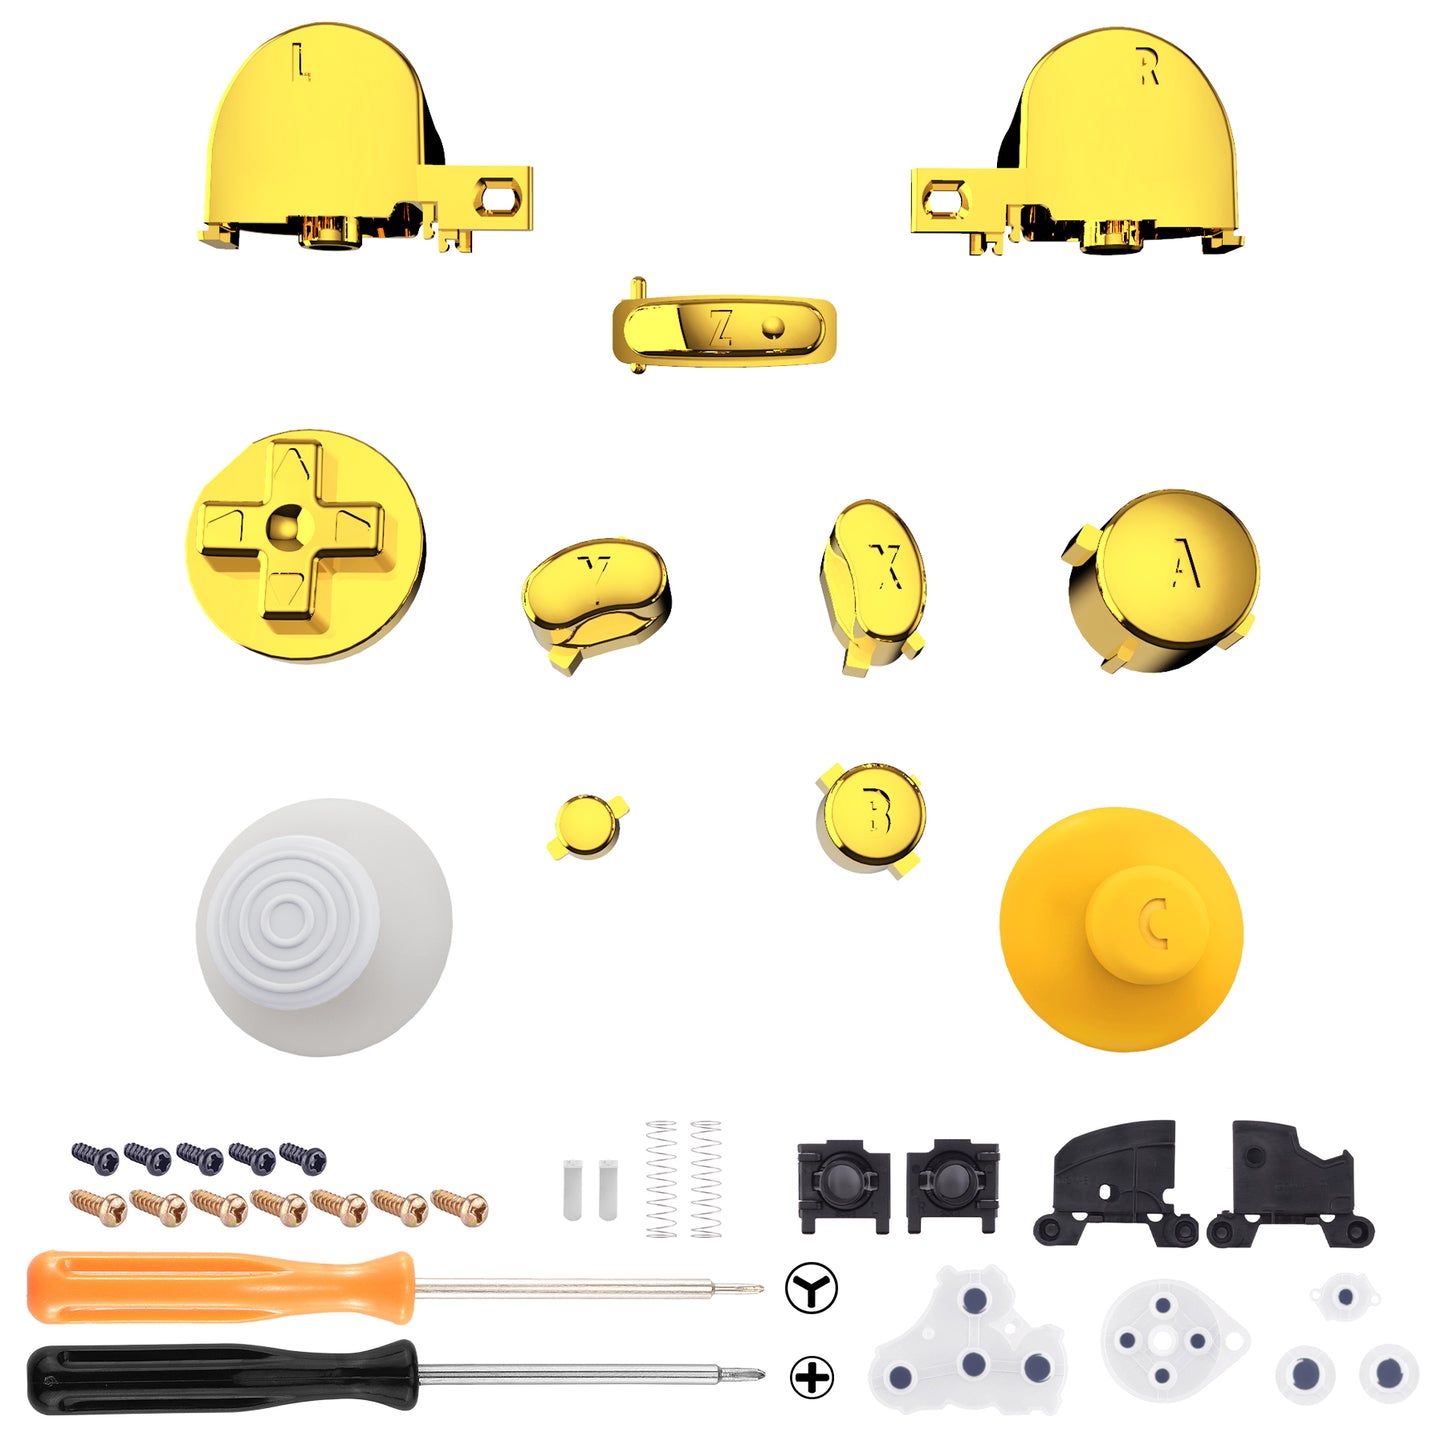 eXtremeRate Retail Chrome Gold Repair ABXY D-pad Z L R Keys for Nintendo GameCube Controller, DIY Replacement Full Set Buttons Thumbsticks & Tools for Nintendo GameCube Controller - Controller NOT Included - GCNJ3001